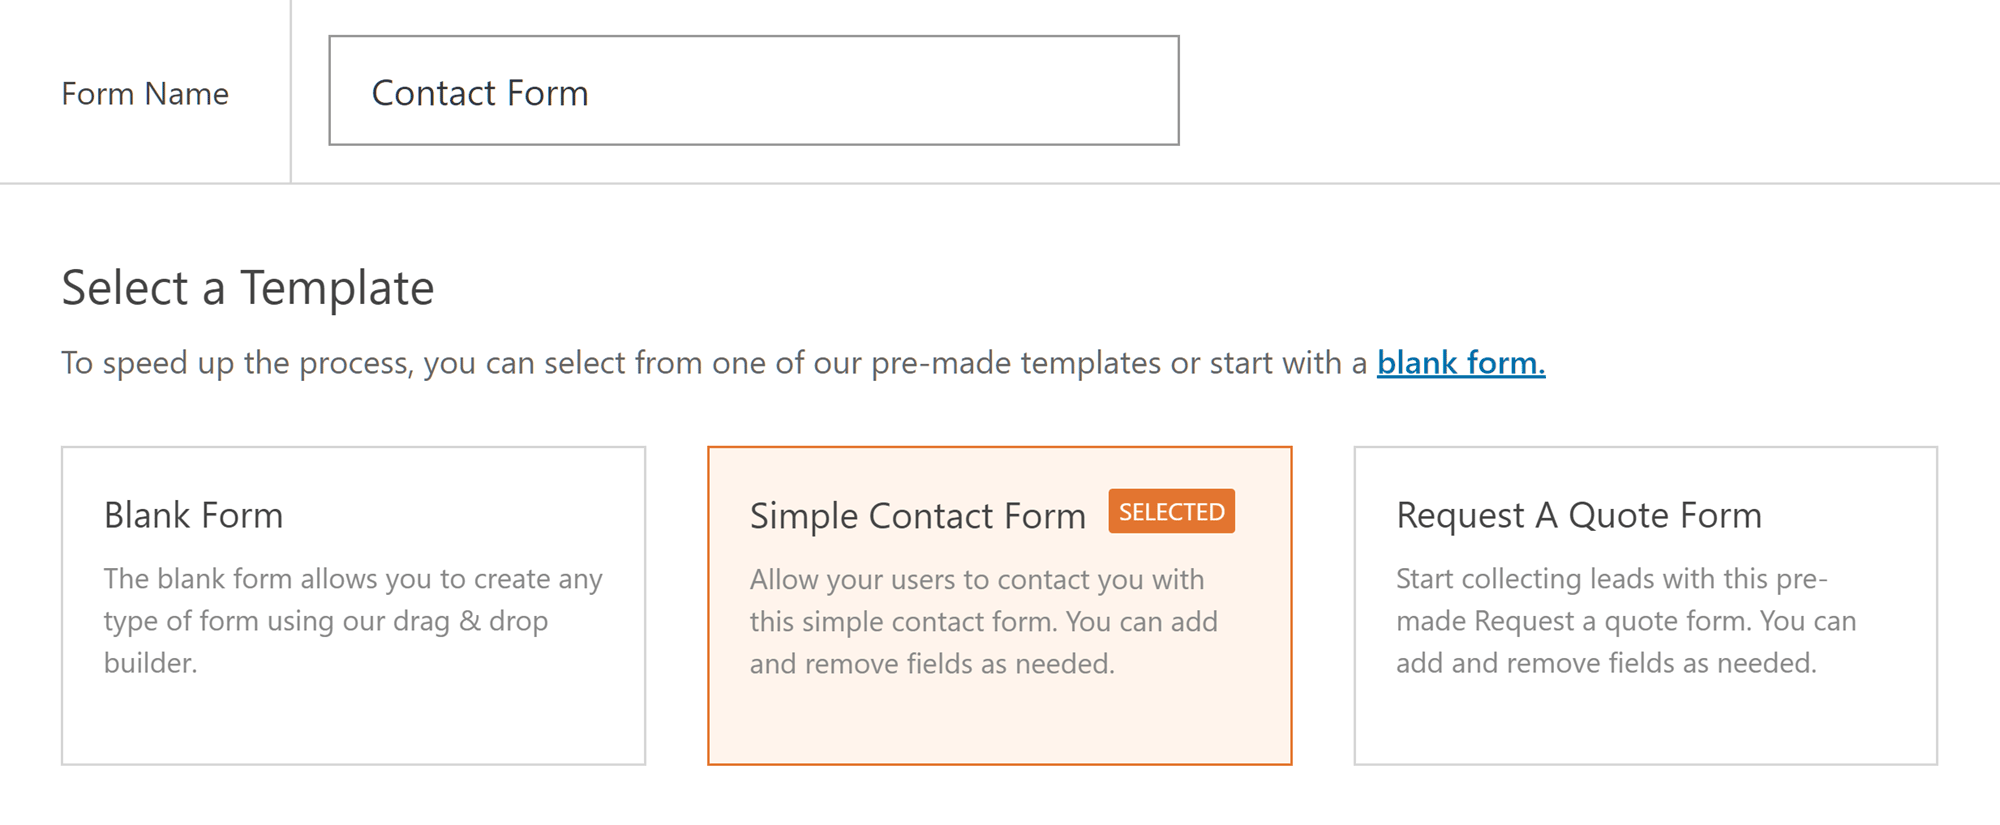 Creating a Contact Form with WPForms